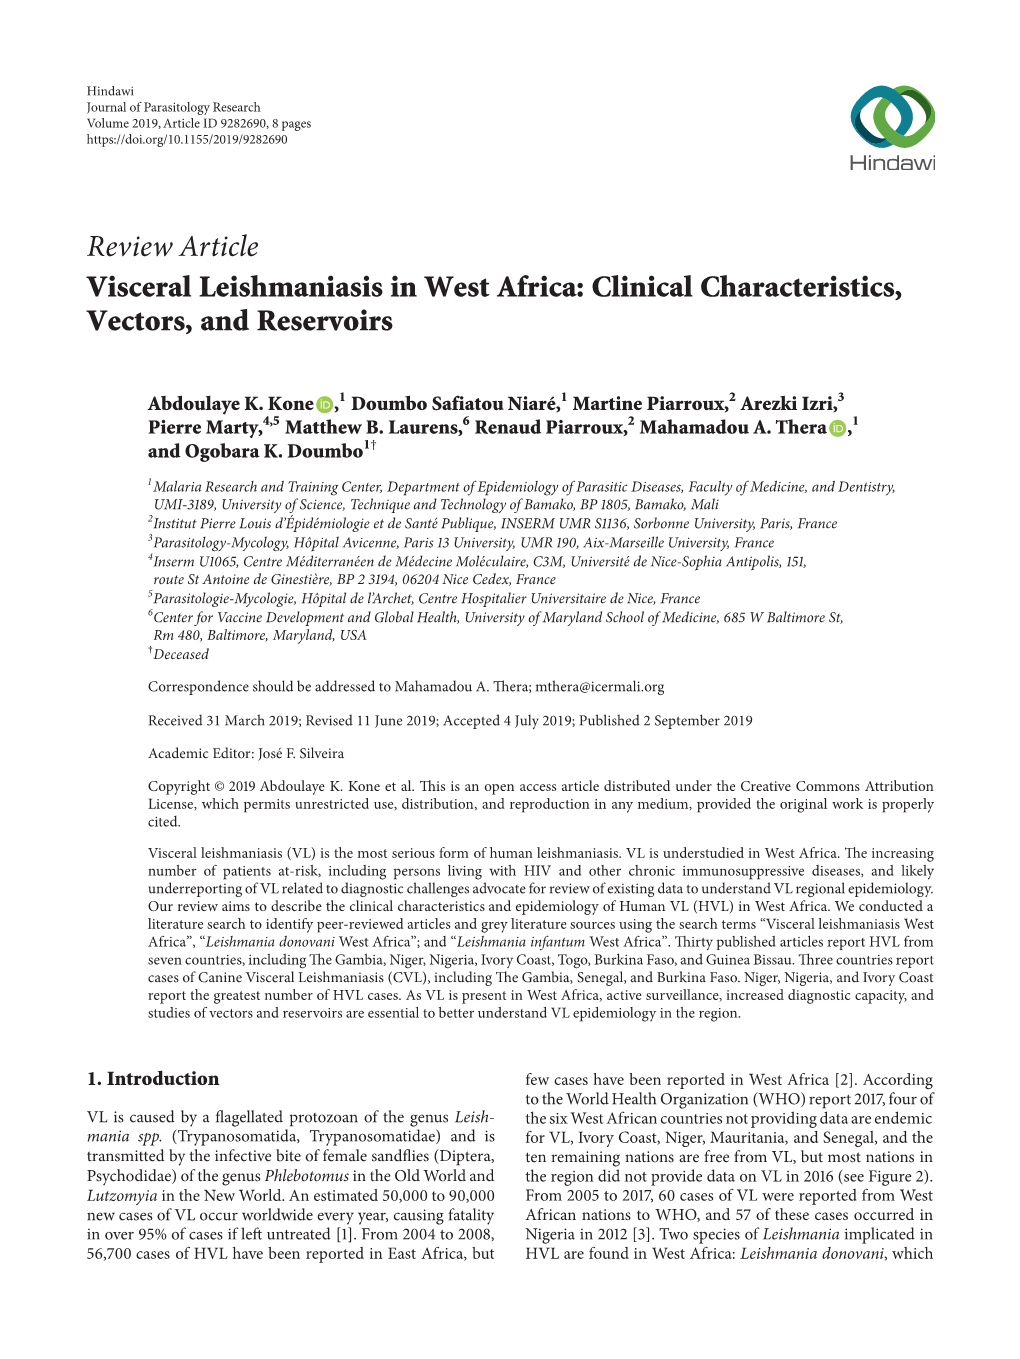 Review Article Visceral Leishmaniasis in West Africa: Clinical Characteristics, Vectors, and Reservoirs